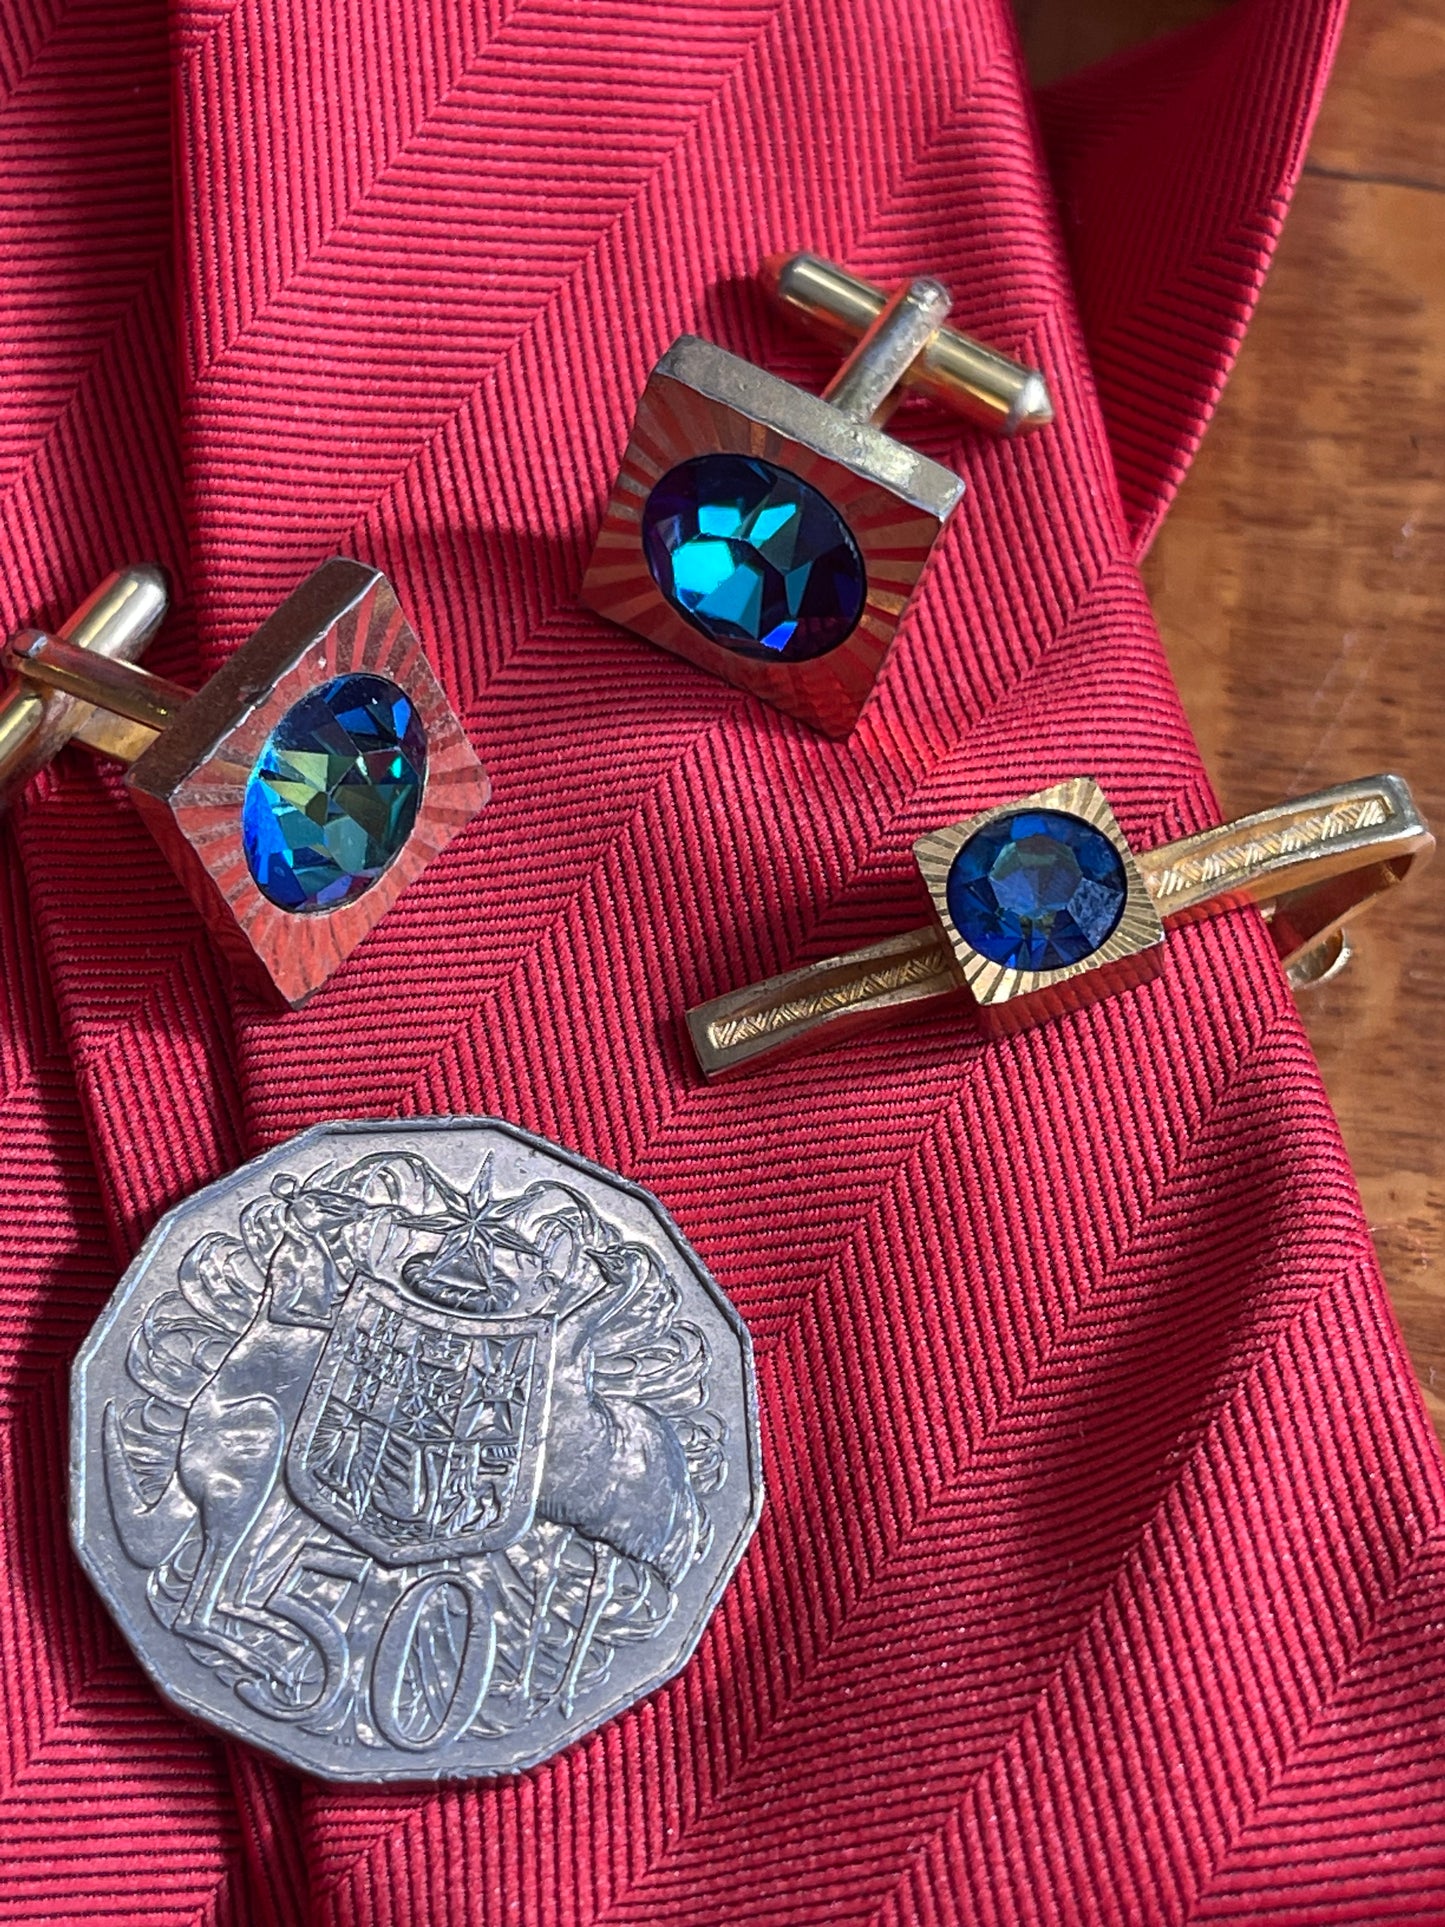 Vintage gold tone cuff links and tie clip with mystic topaz